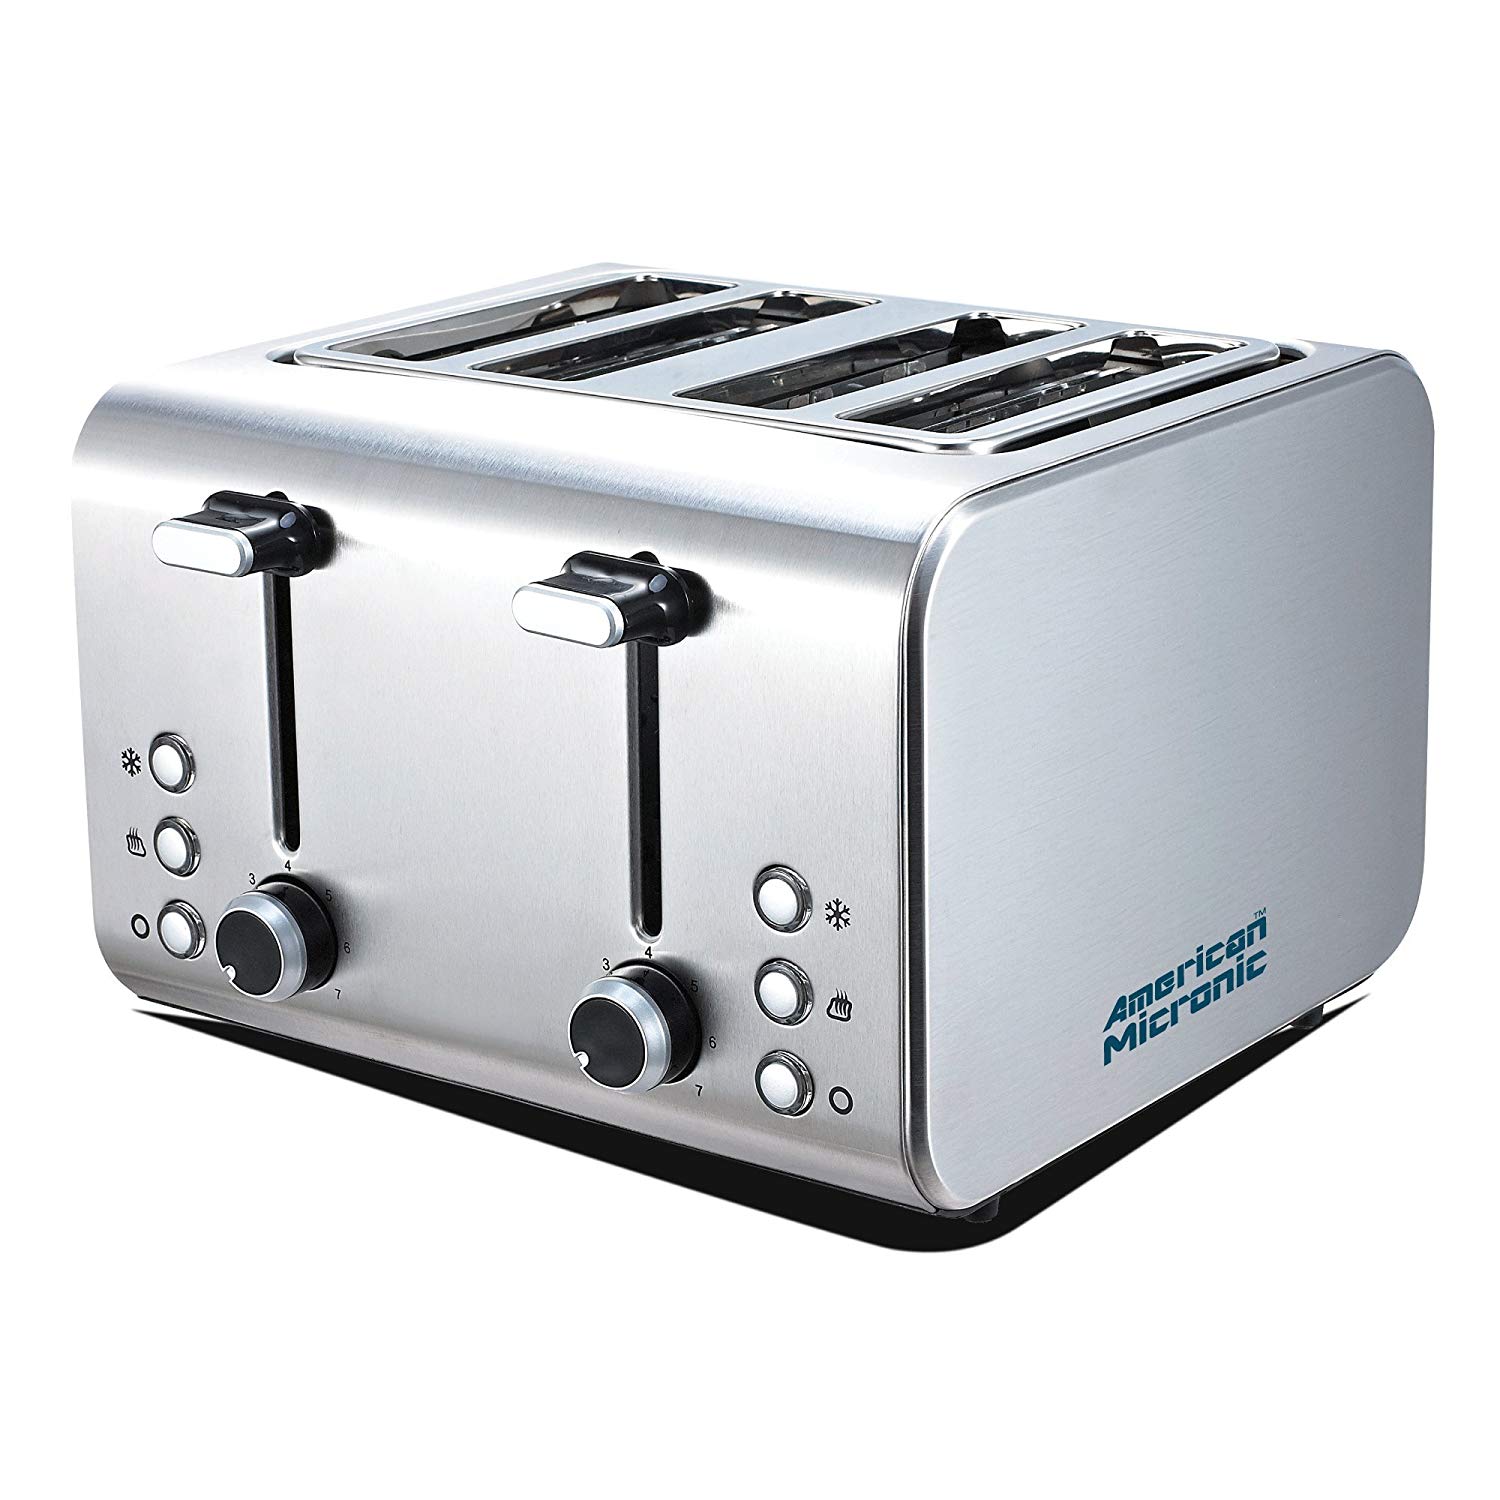 American Micronic AMI-TSS2-150Dx 4-Slice 2in1 Pop-up Toaster